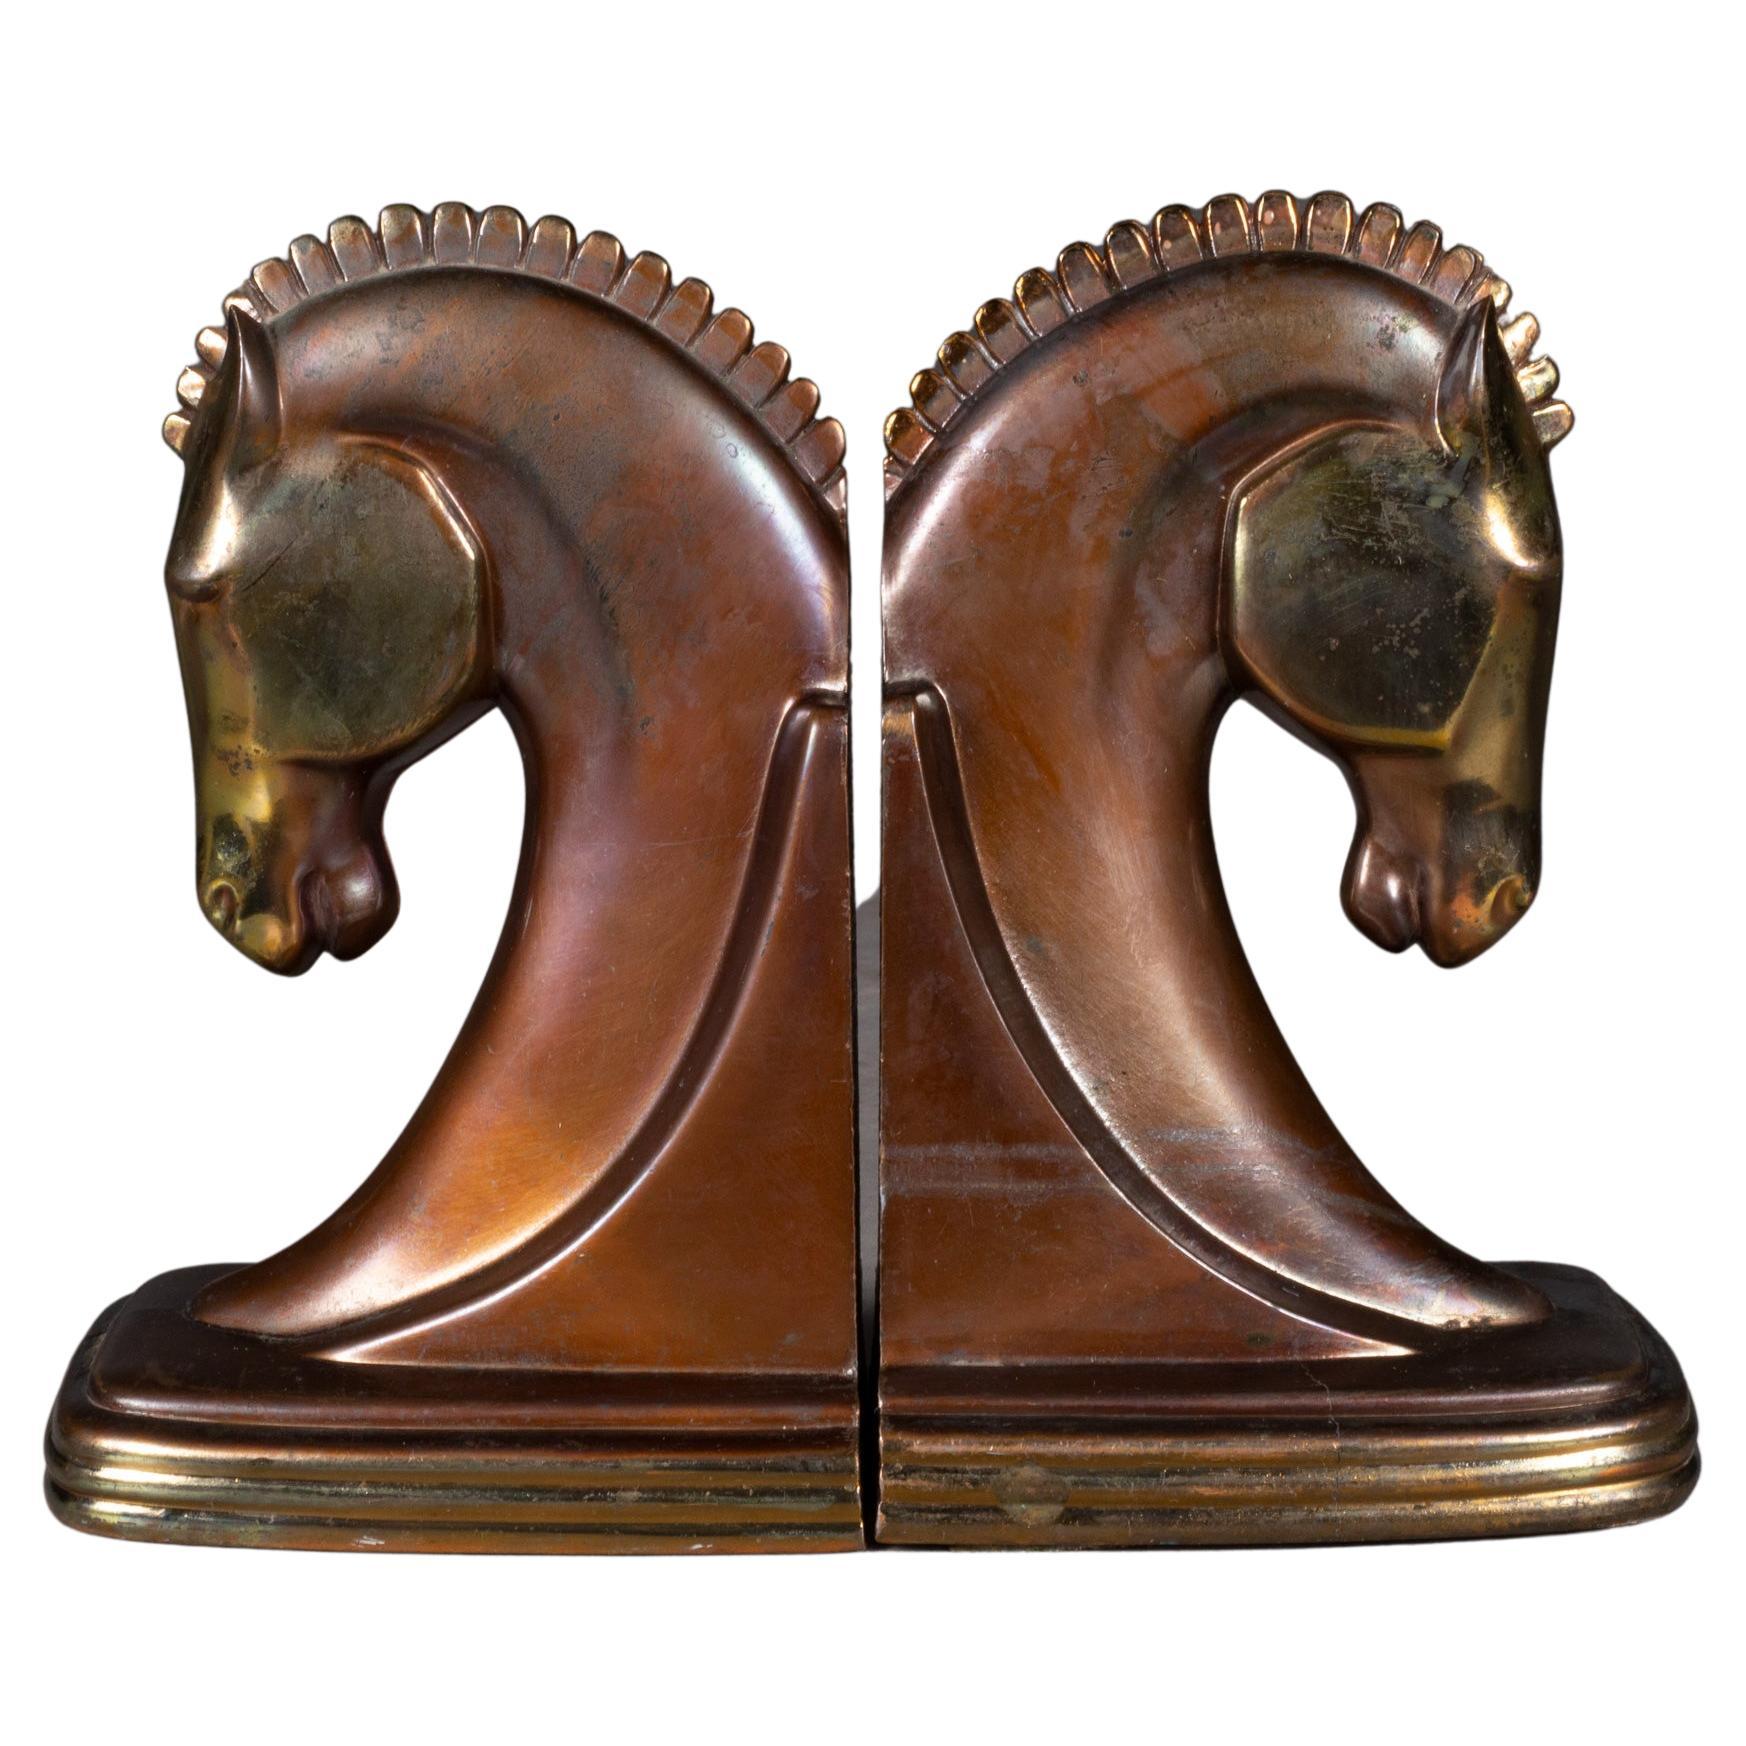 Art Deco Bronze and Copper Plated Trojan Horse Bookends by Dodge Inc. c.1930